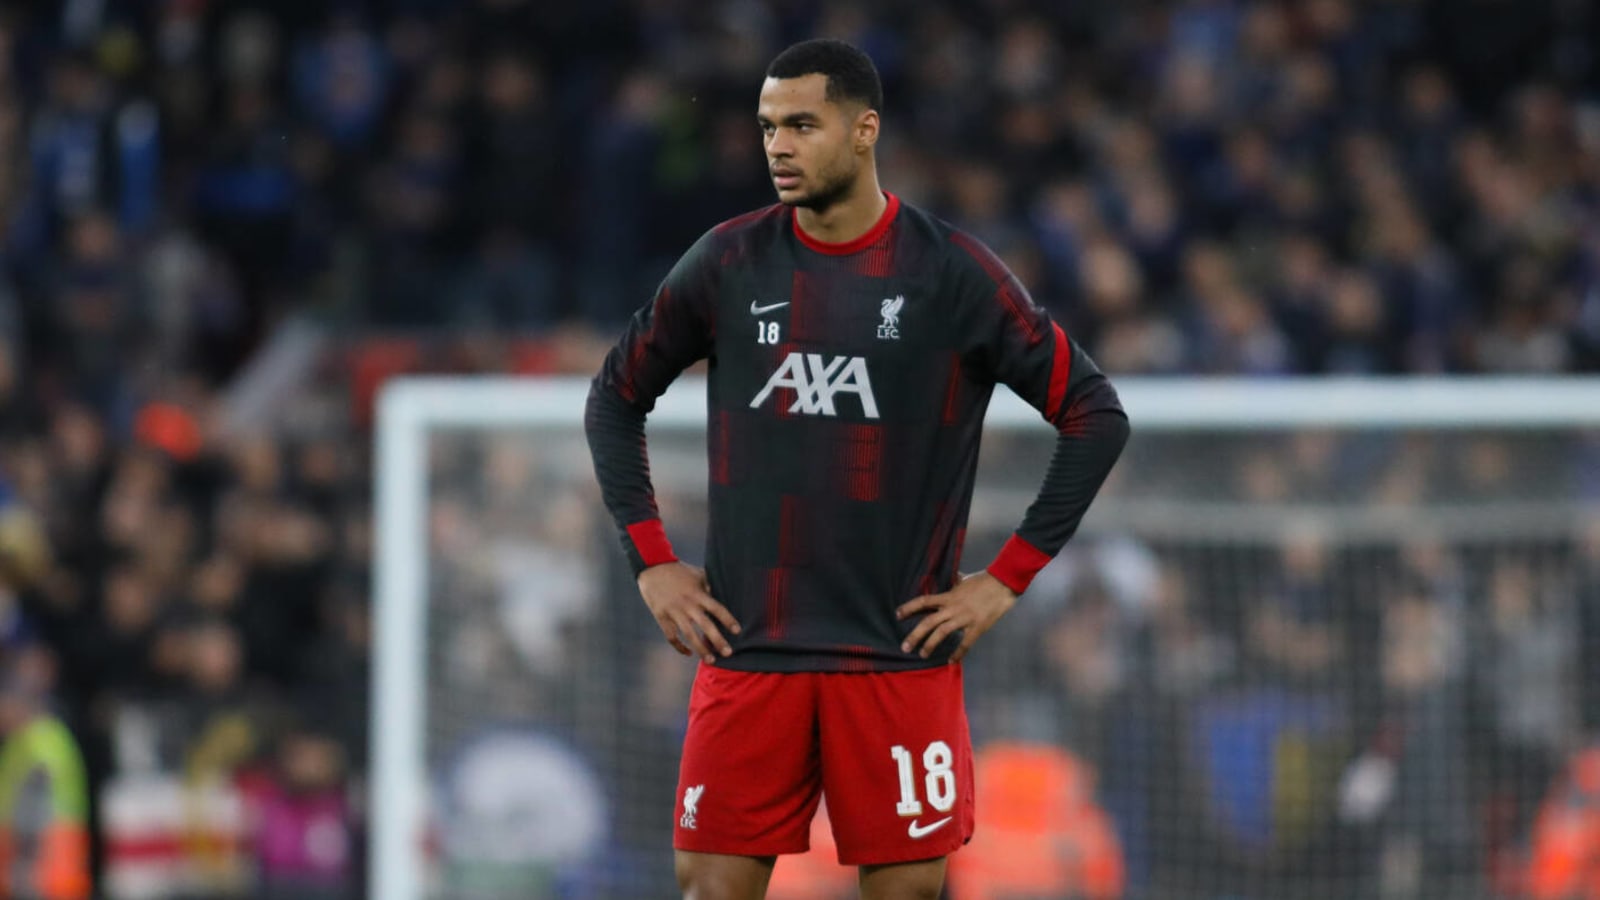 ‘Very quiet…’ – BBC pundit claims Liverpool trio have been ‘virtually nonexistent’ v Fulham